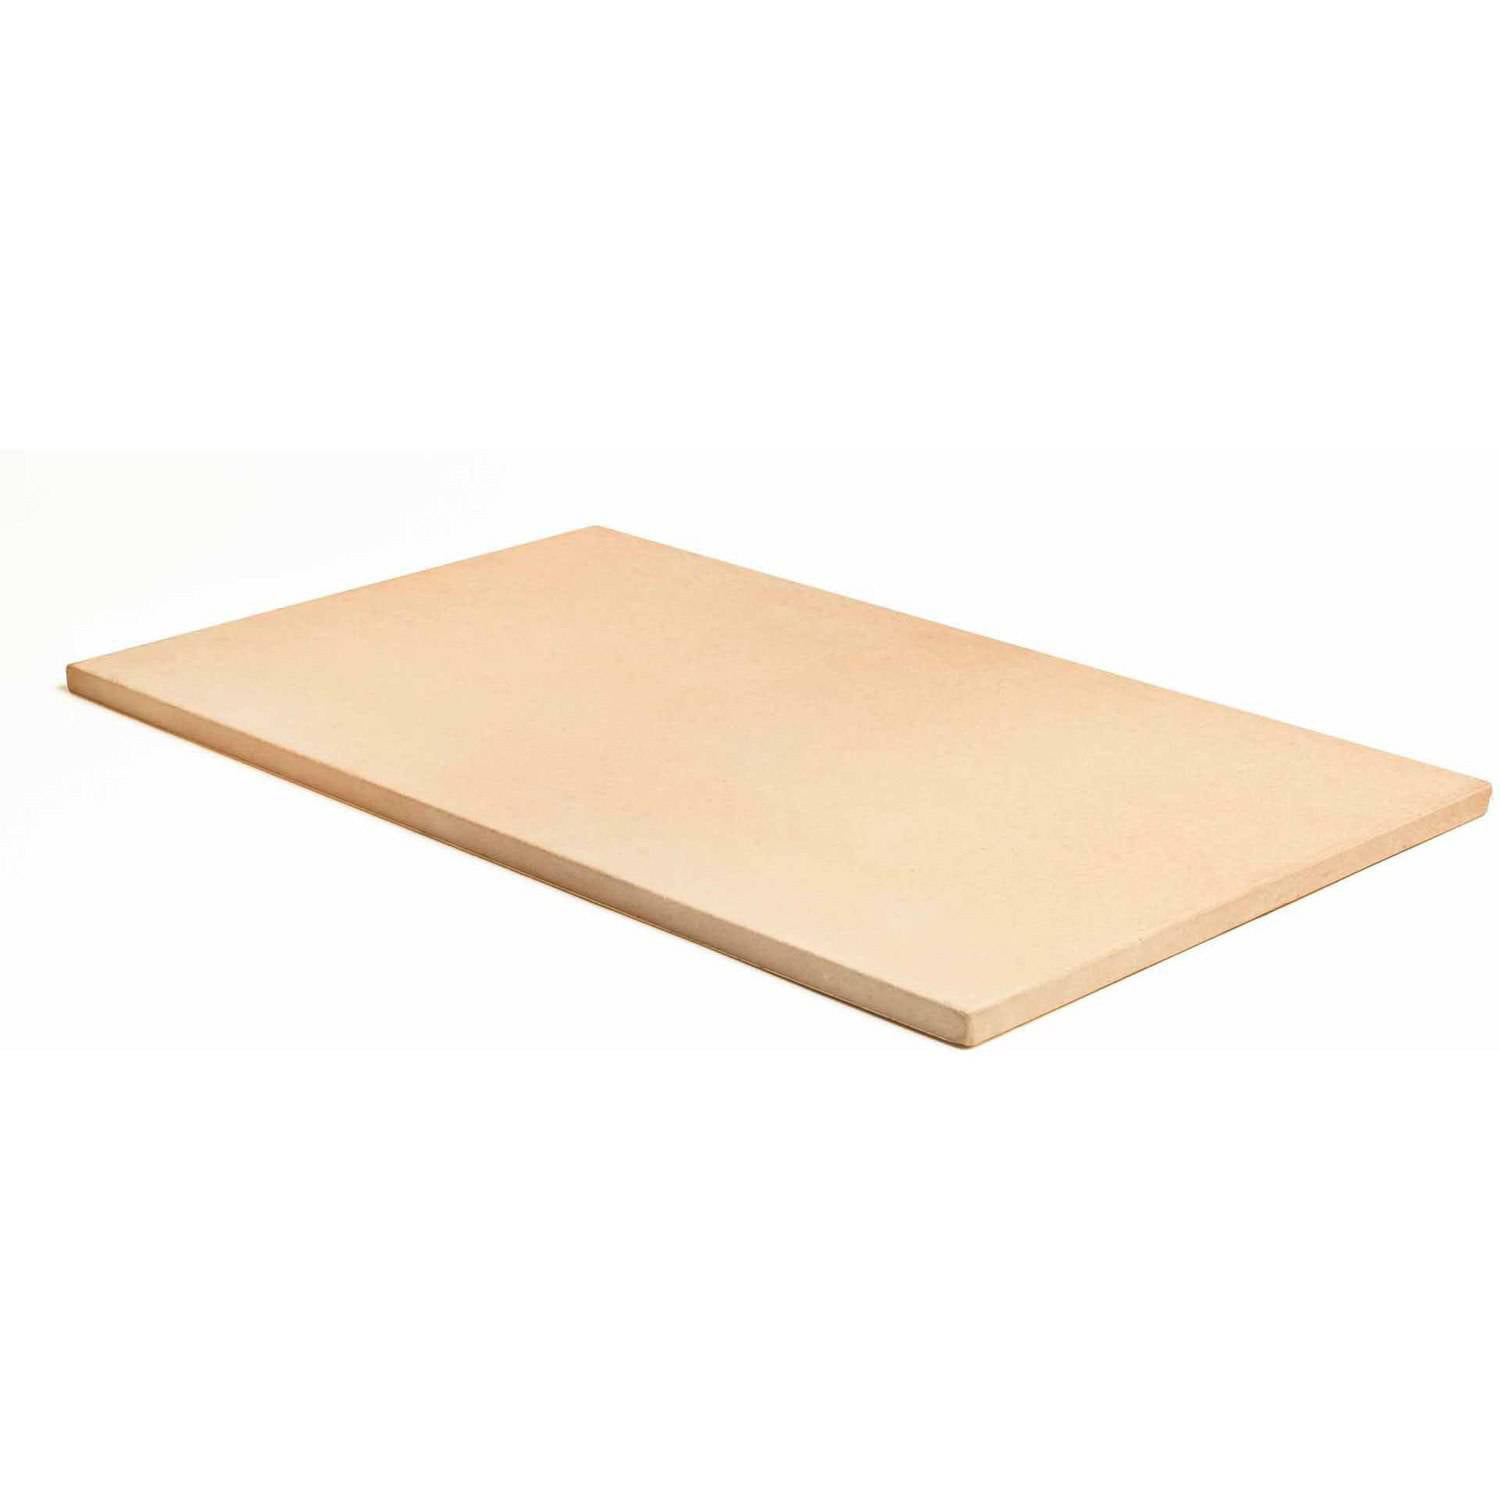 Rectangular Pizza Stone for Oven or Grill